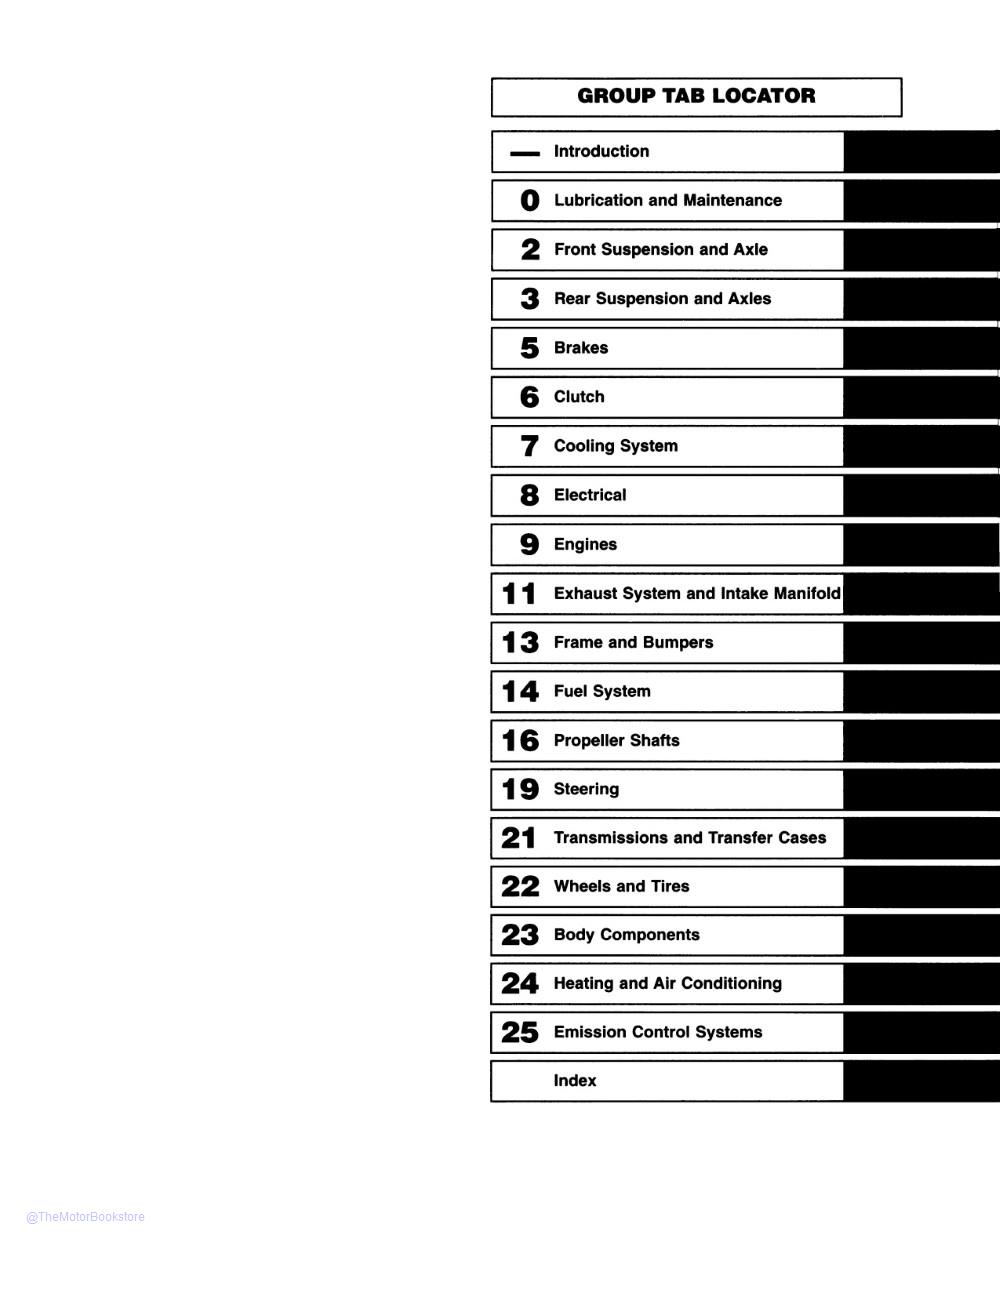 1995 Jeep Grand Cherokee Shop Manual  - Table of Contents